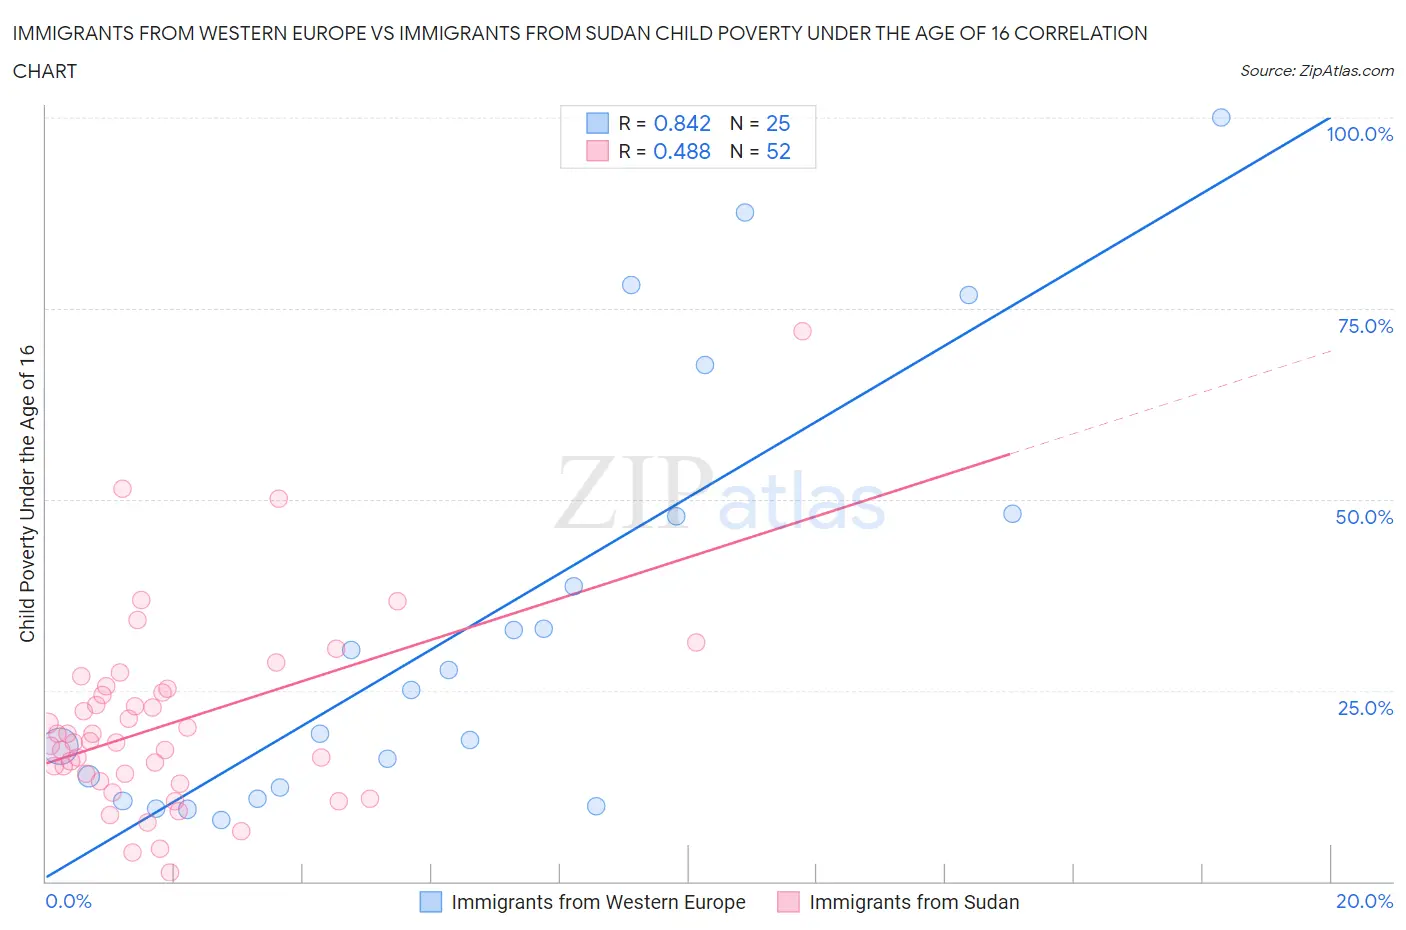 Immigrants from Western Europe vs Immigrants from Sudan Child Poverty Under the Age of 16